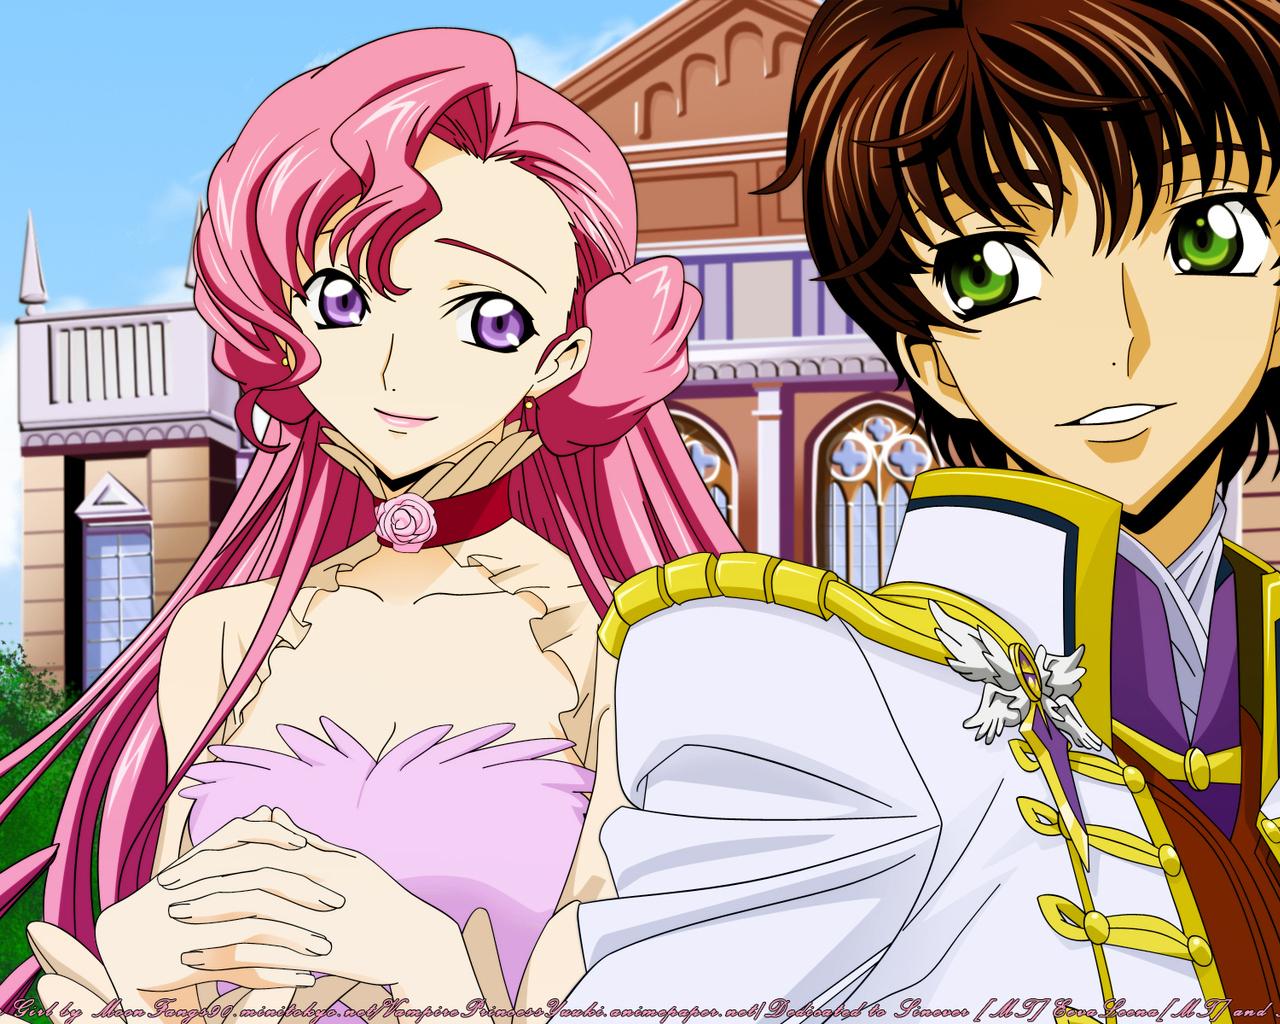 Picture Code Geass Anime